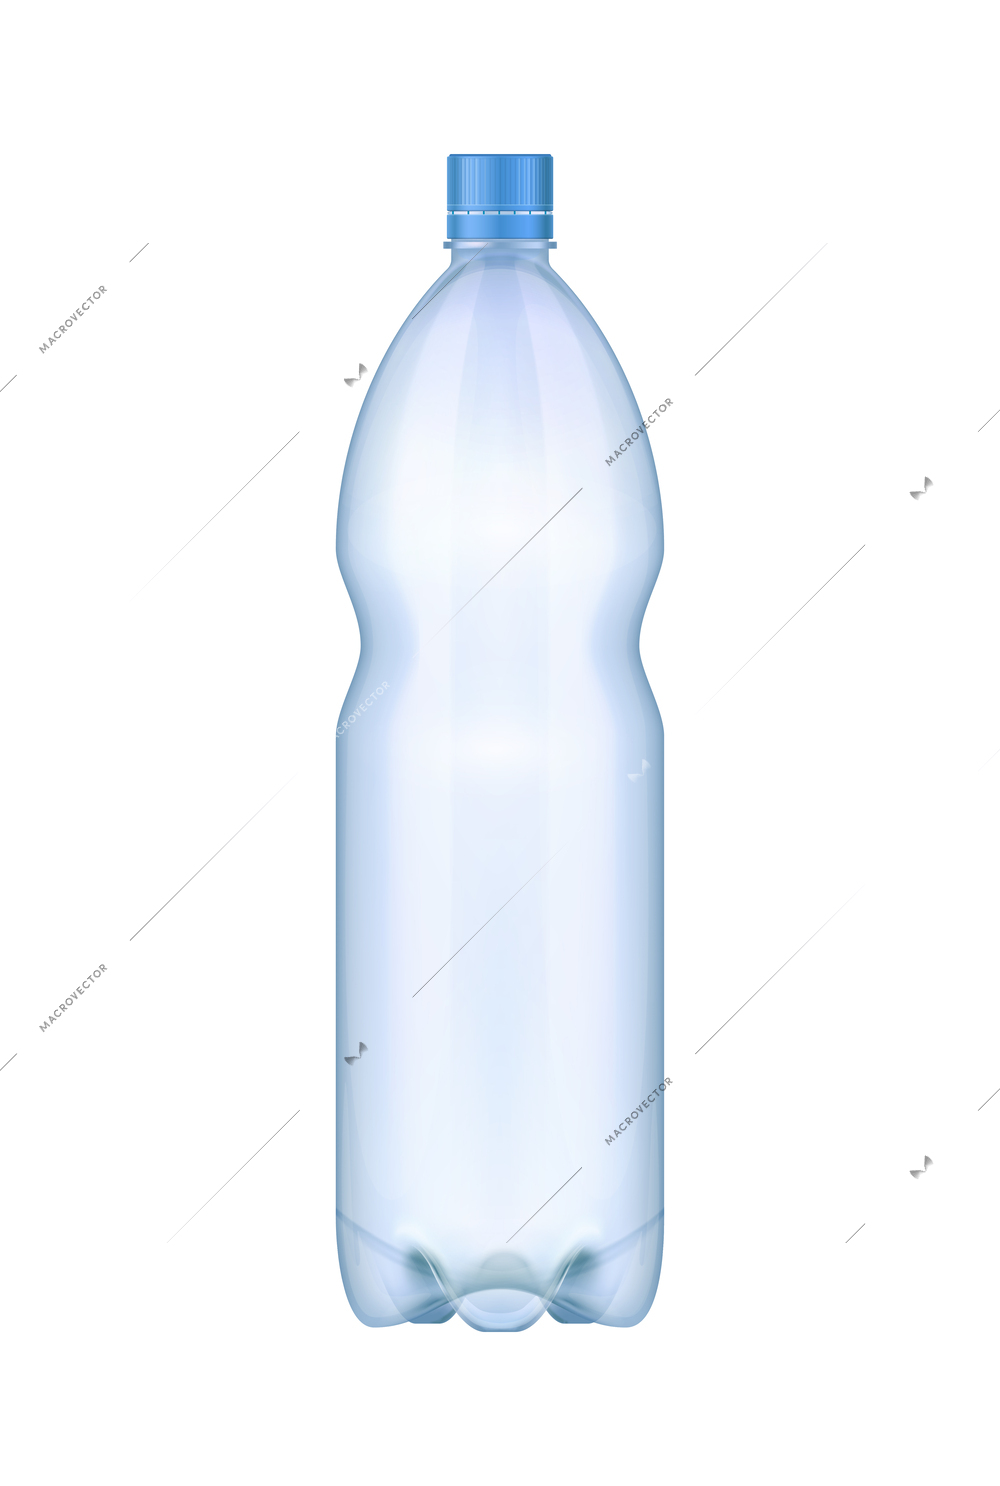 Realistic plastic bottle of water on white background vector illustration